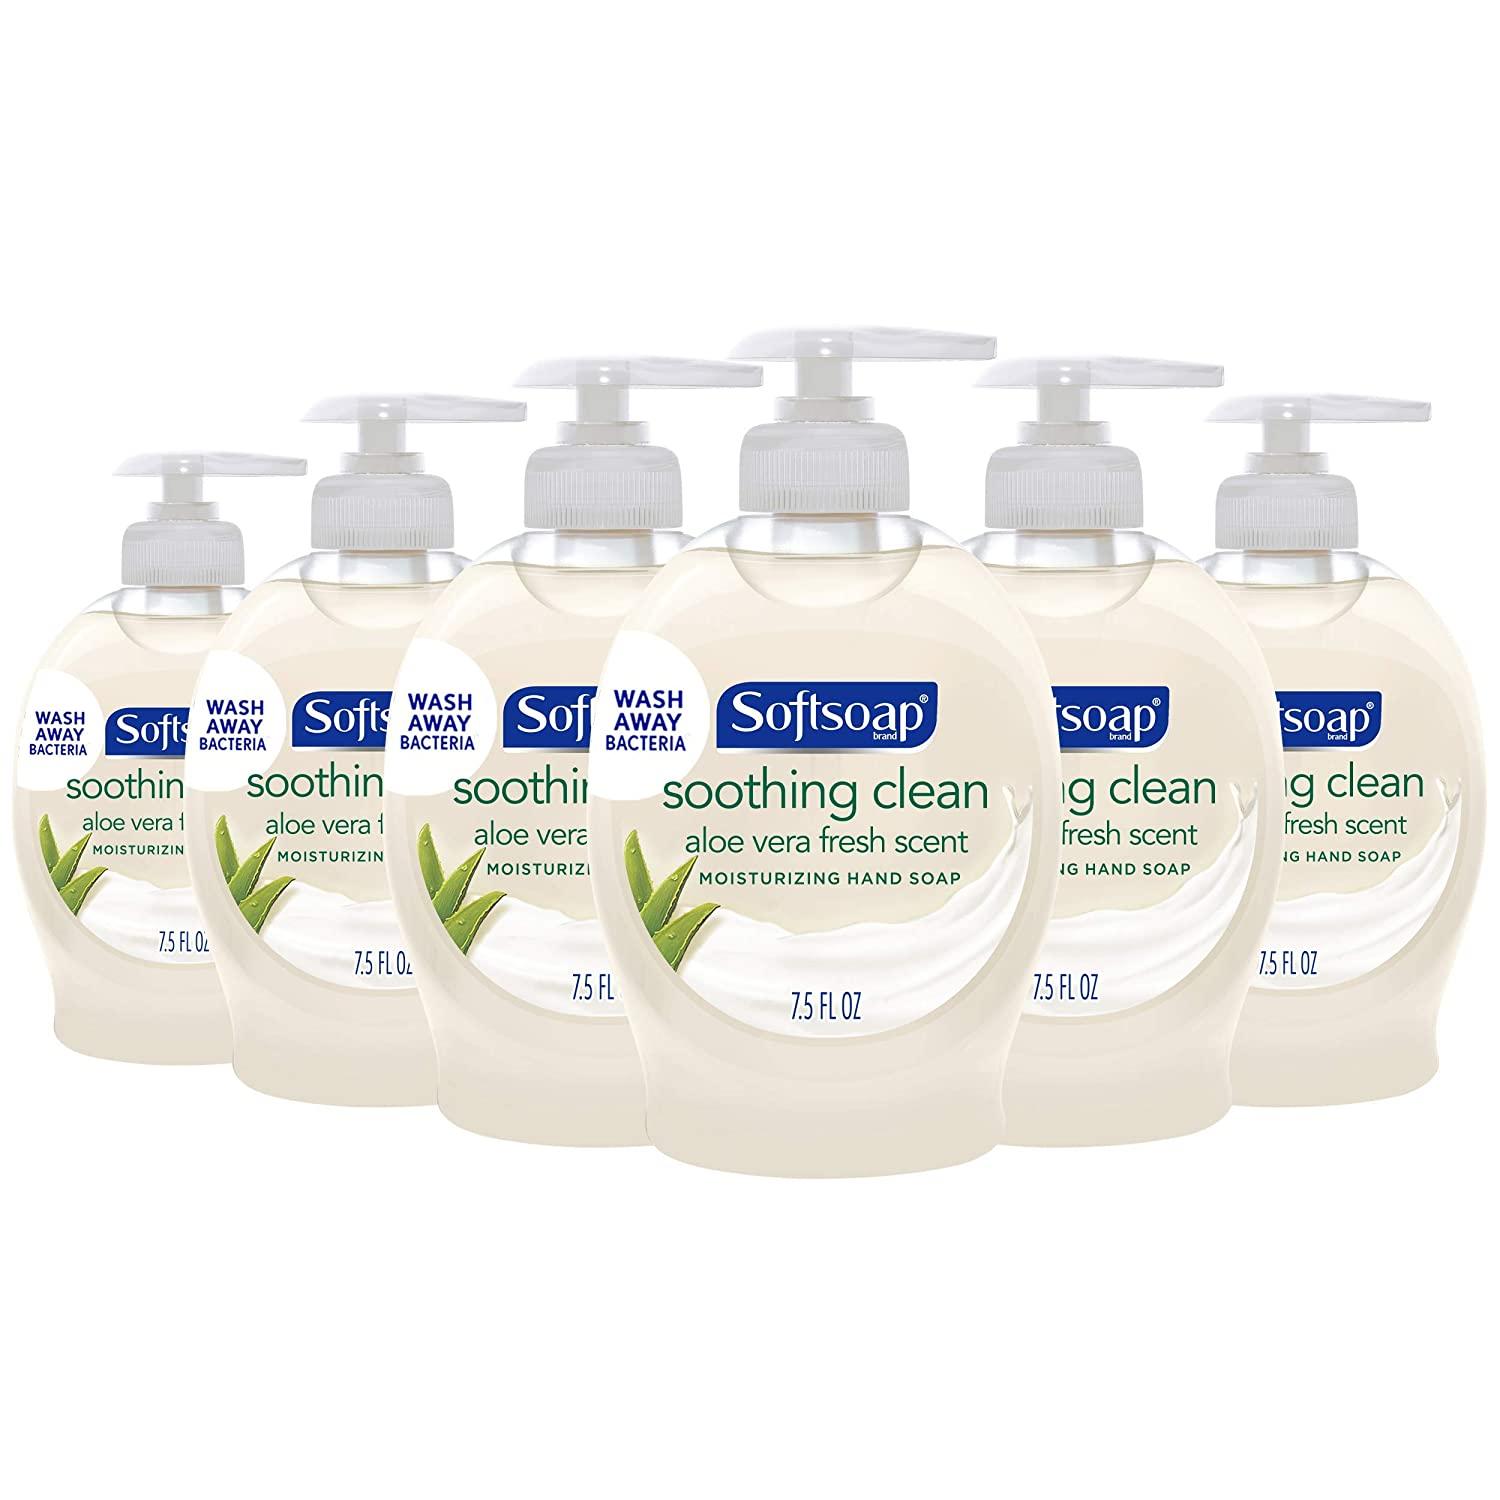 6 Softsoap Soothing Clean Moisturizing Liquid Hand Soap for $4.14 Shipped